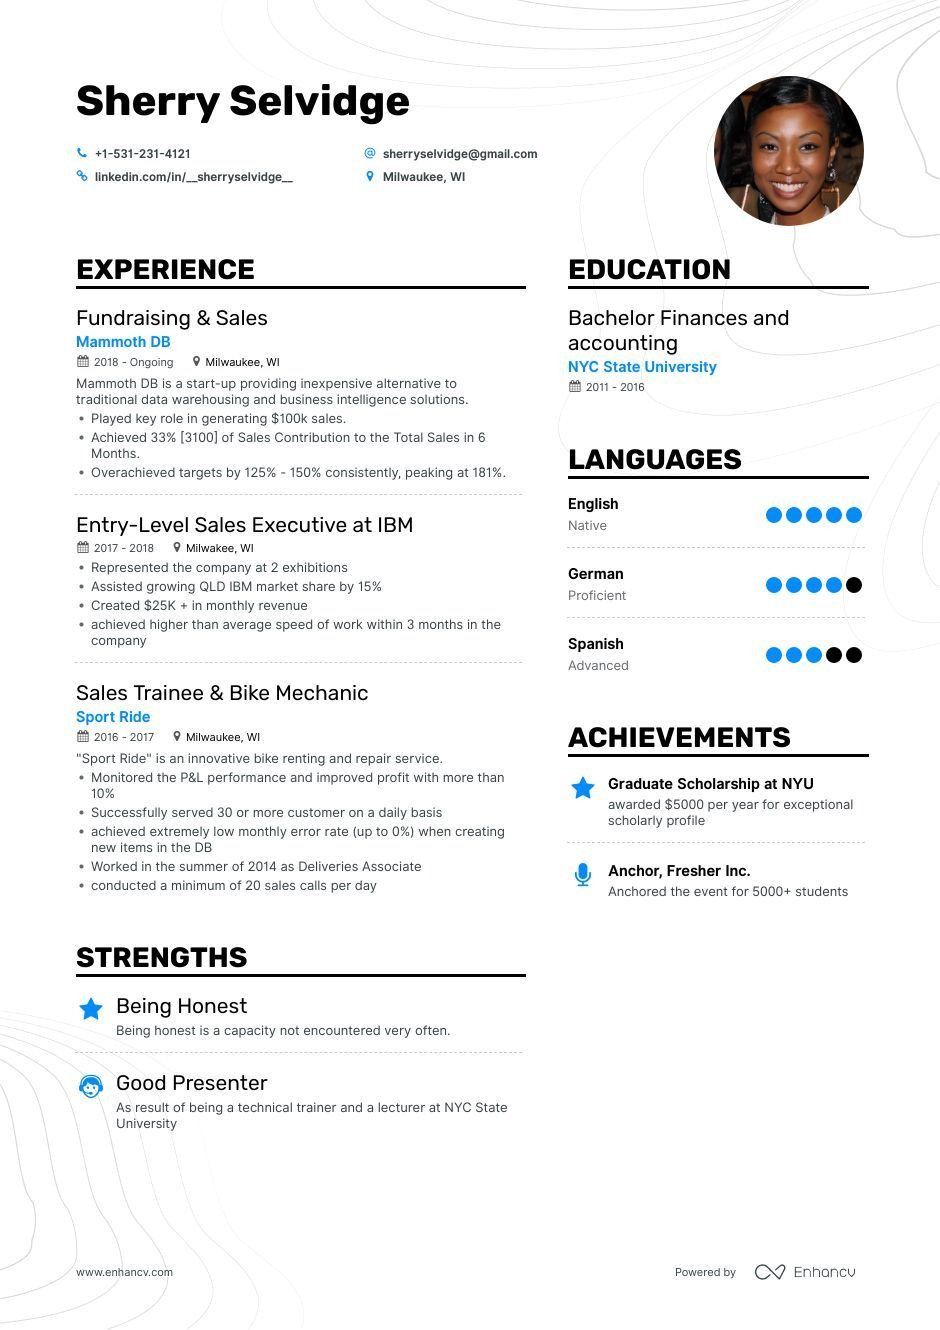 Sample Resume Objectives for Entry Level Sales 6lancarrezekiq Entry Level Sales Resume Examples [adapted for 2019] Sales …